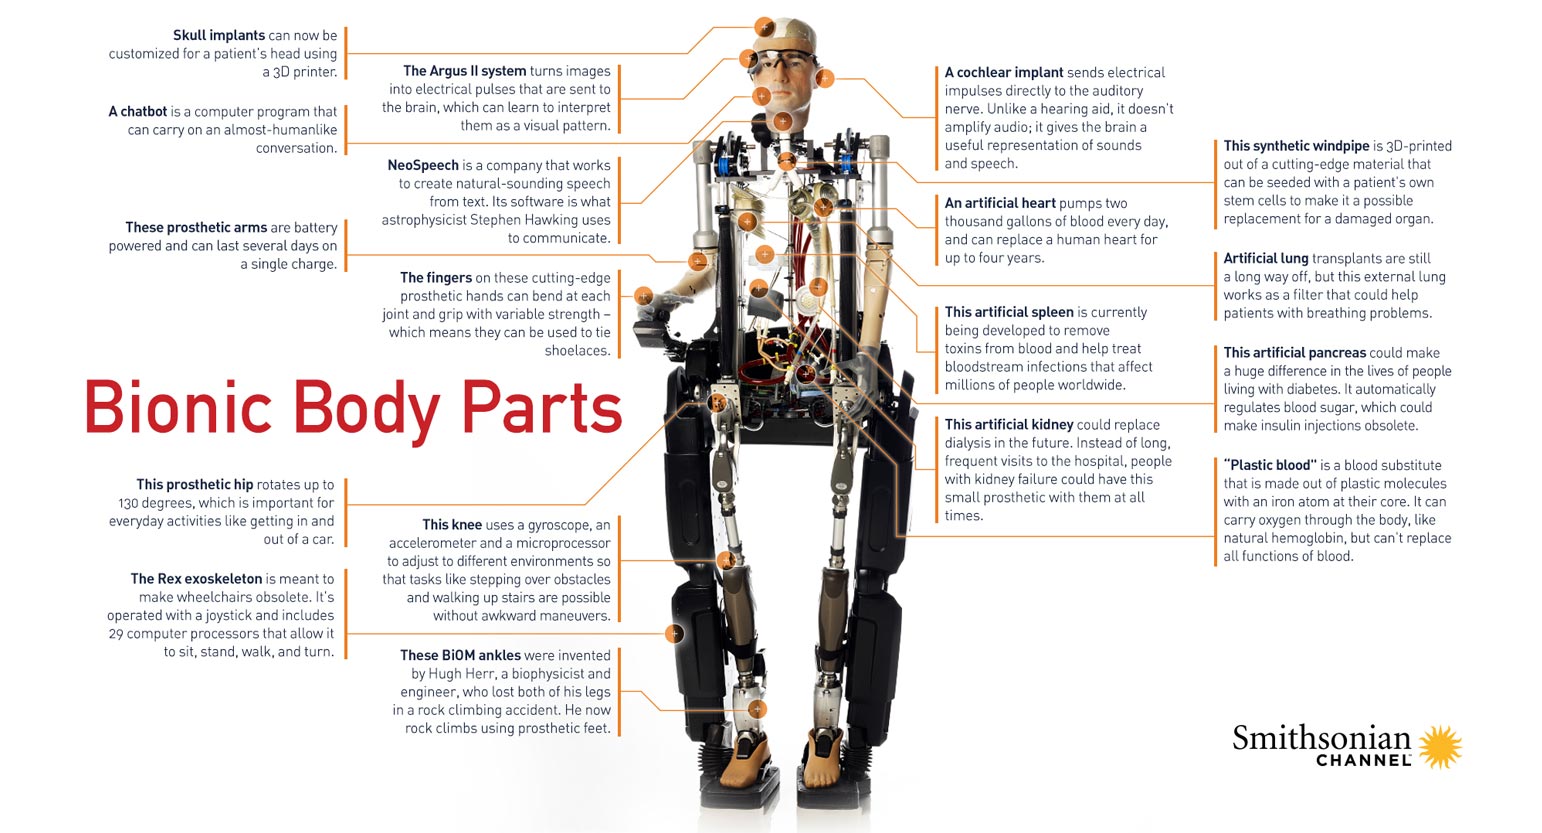 Brain Gym: most bionic body part in an artificial human